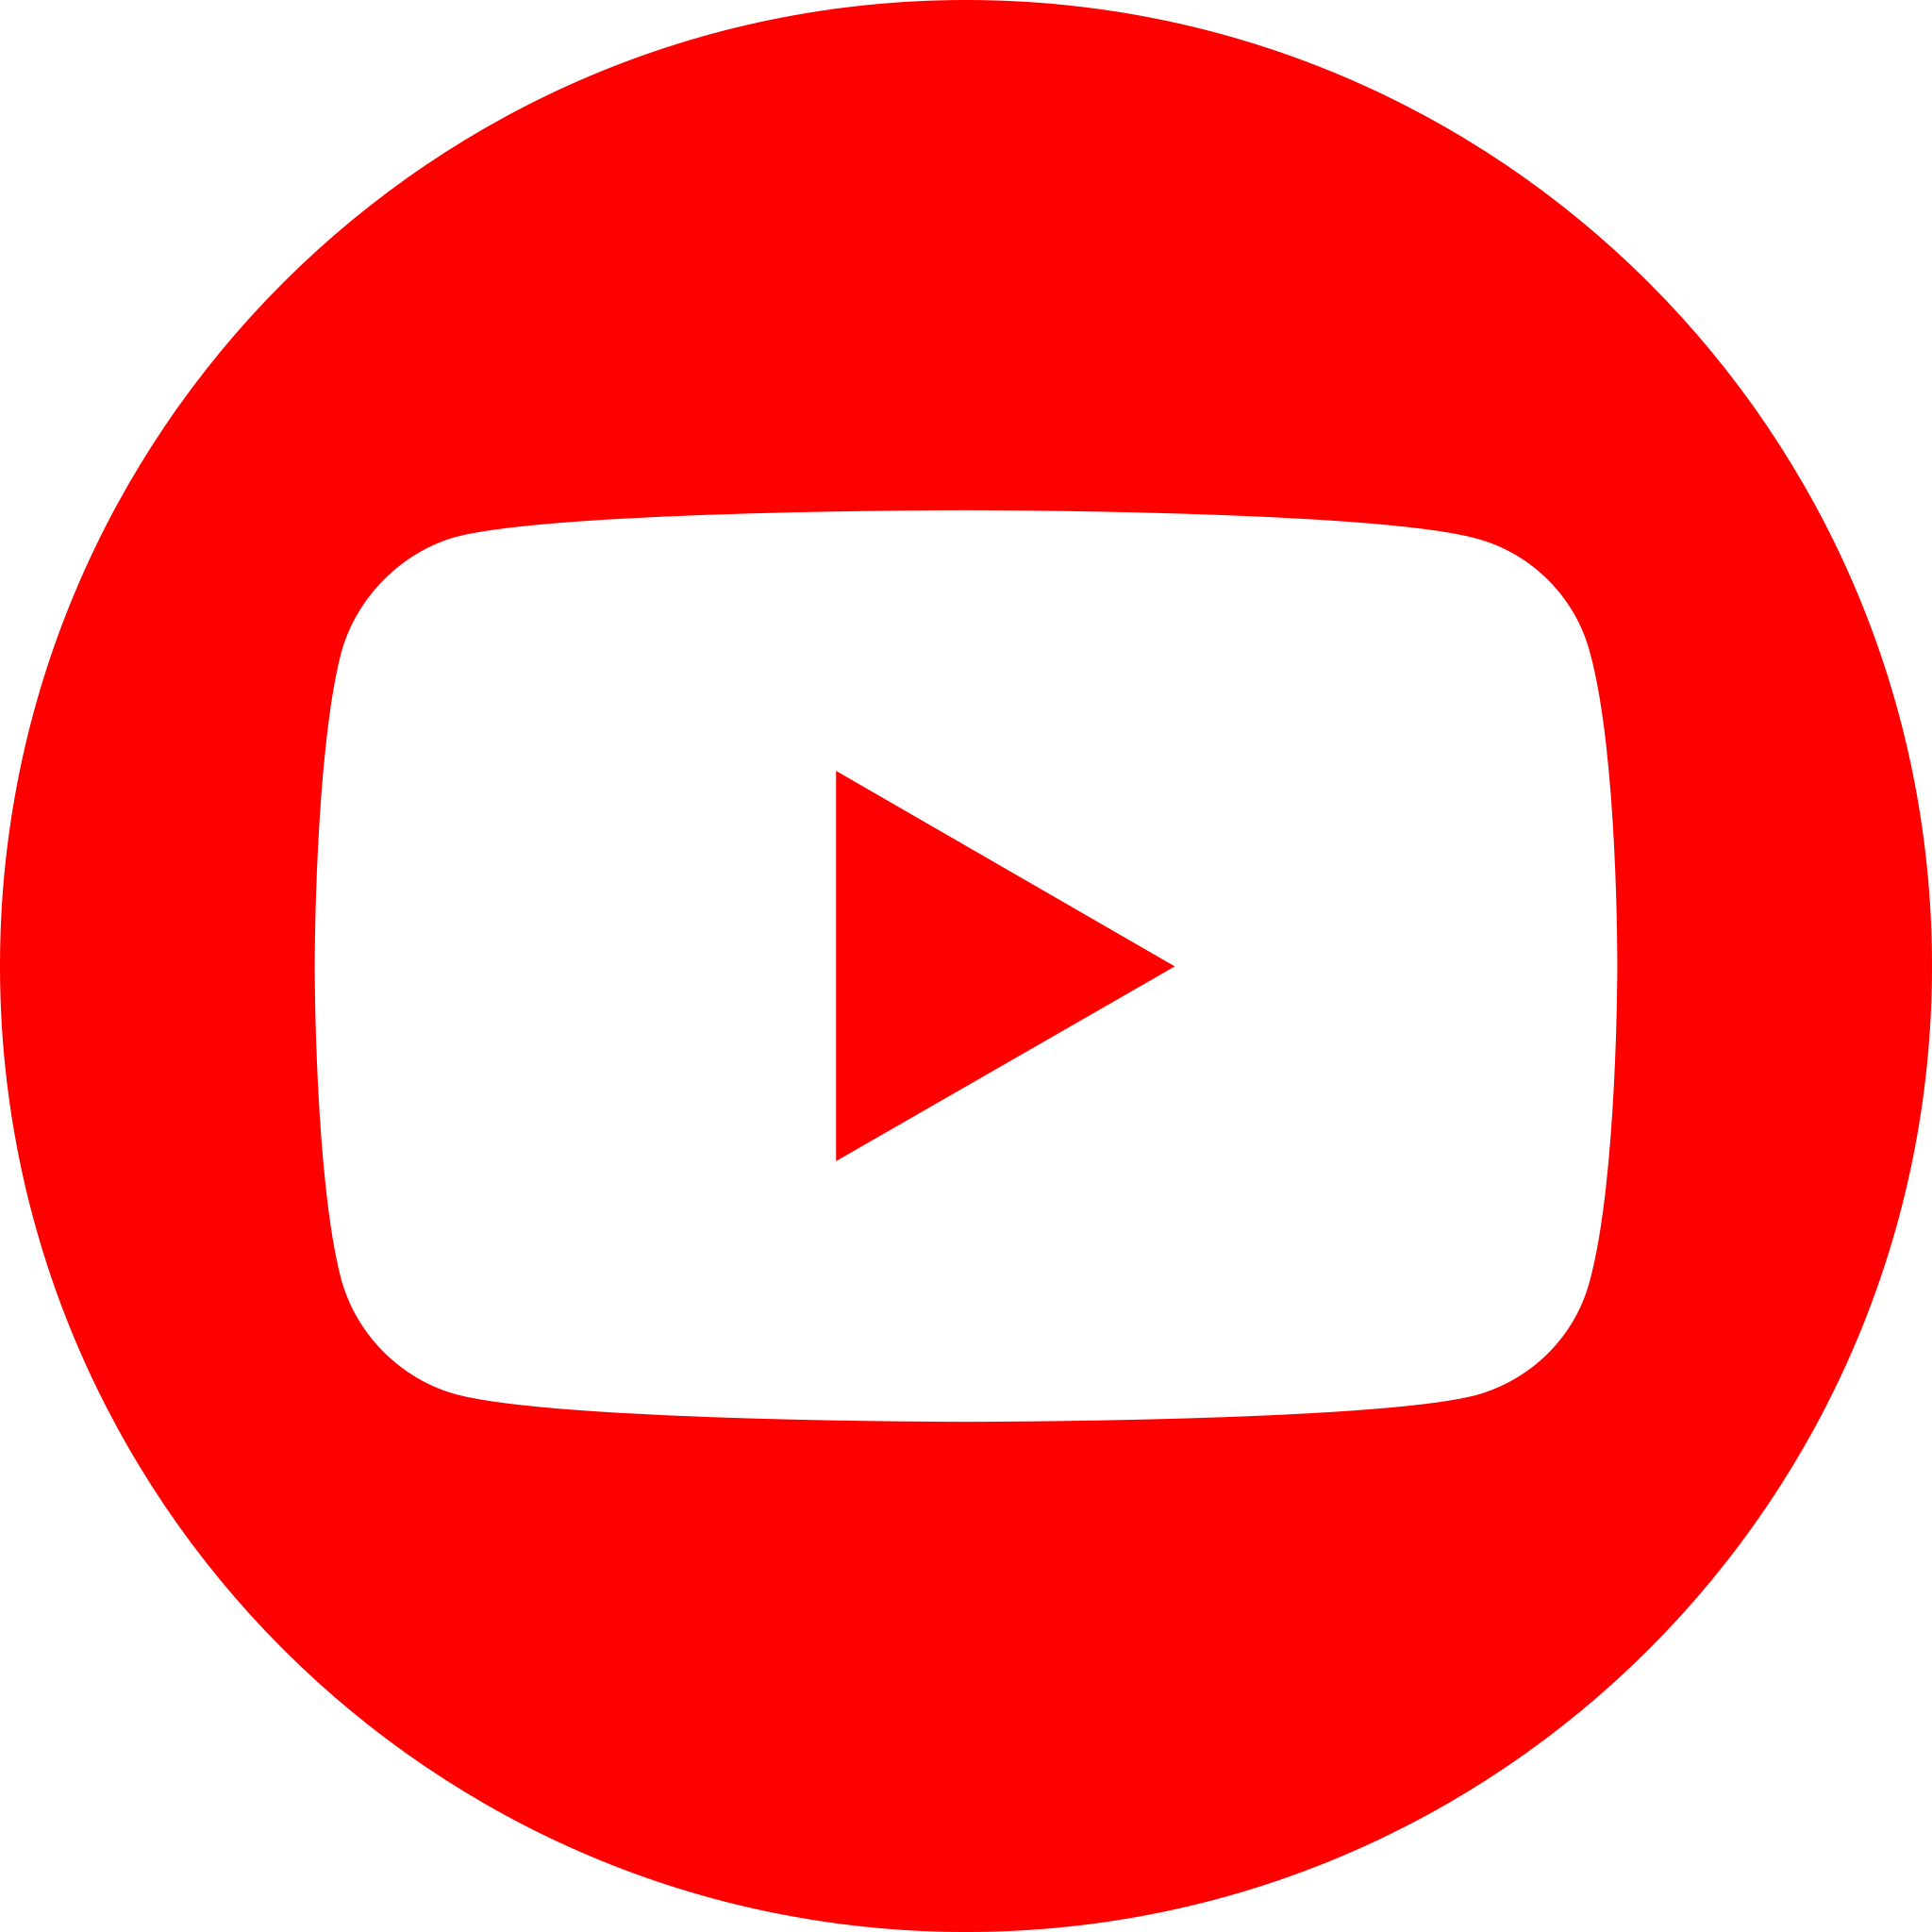 https://acworth-ga.omegalearning.com/wp-content/uploads/2023/03/YouTube_social_red_circle_2017.svg_.png